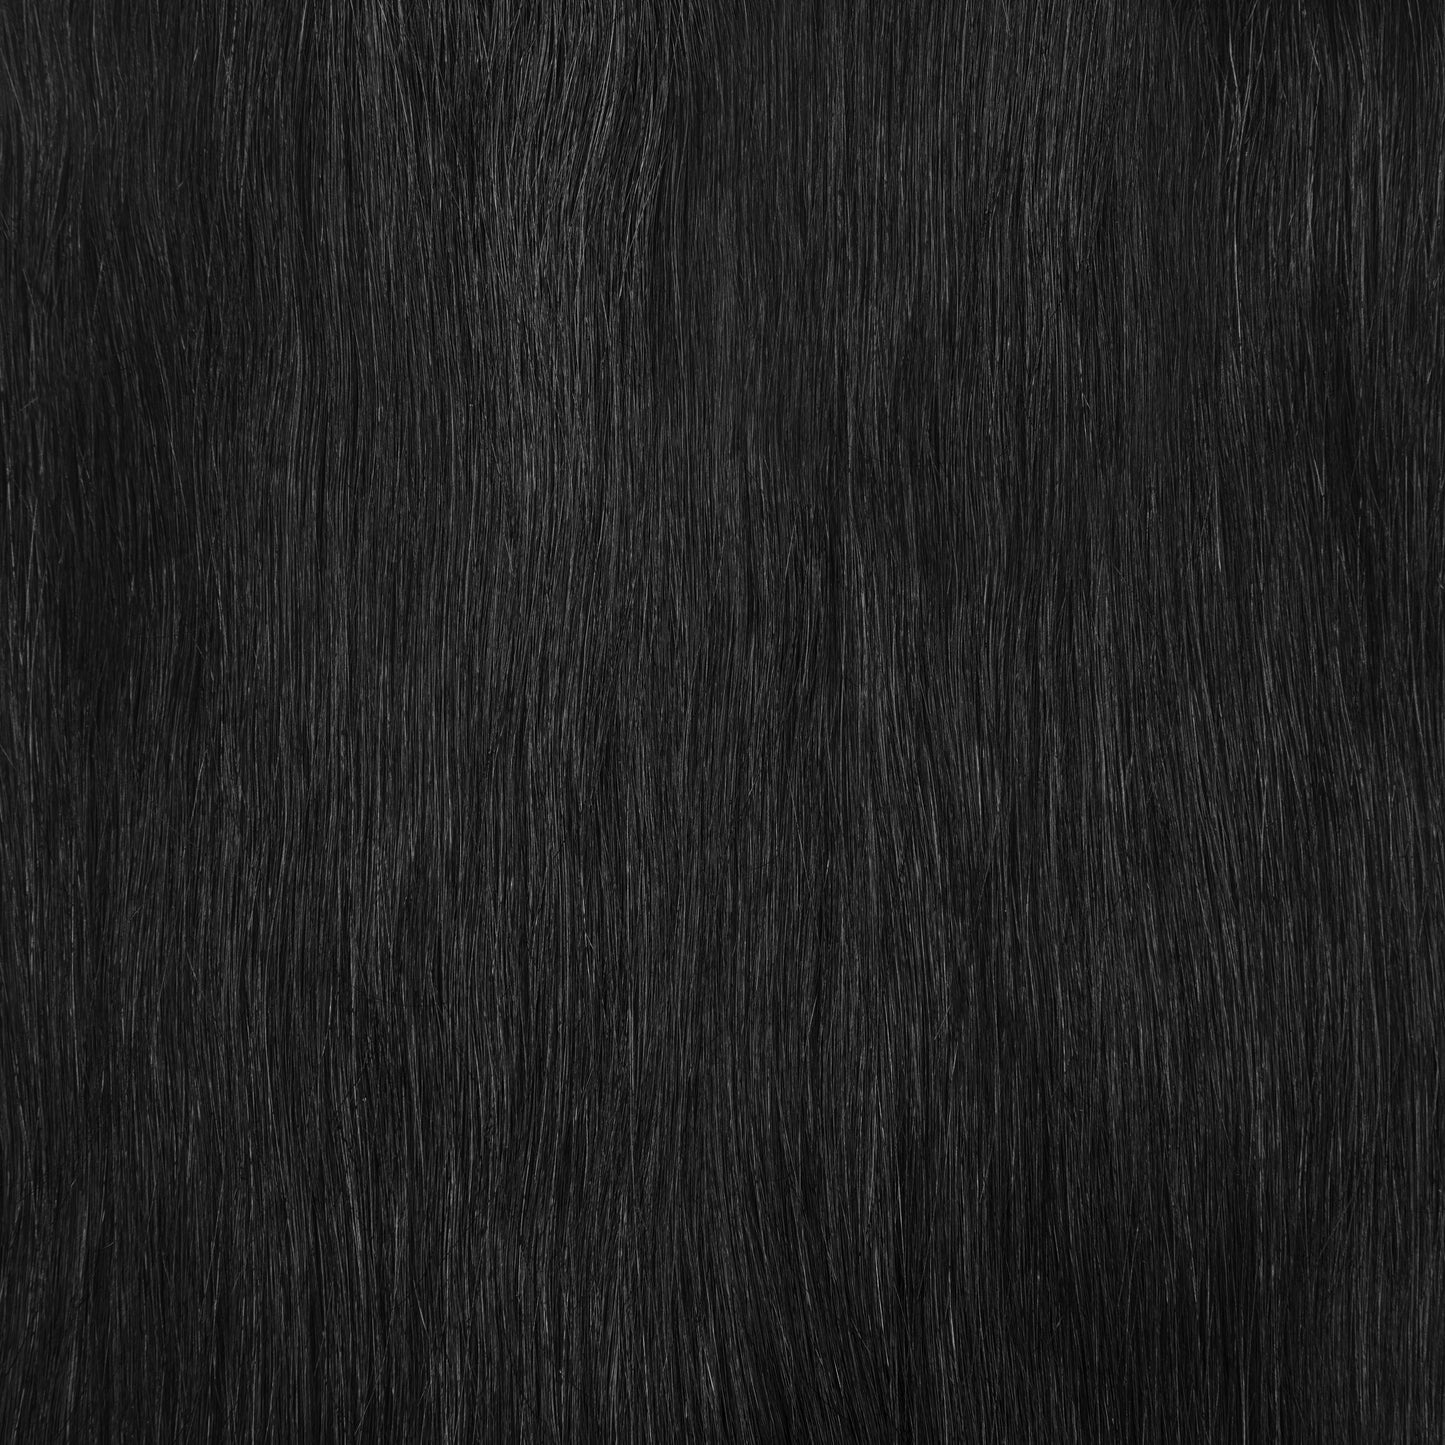 16" Sublime Clip-In Hair Extensions Jet Black